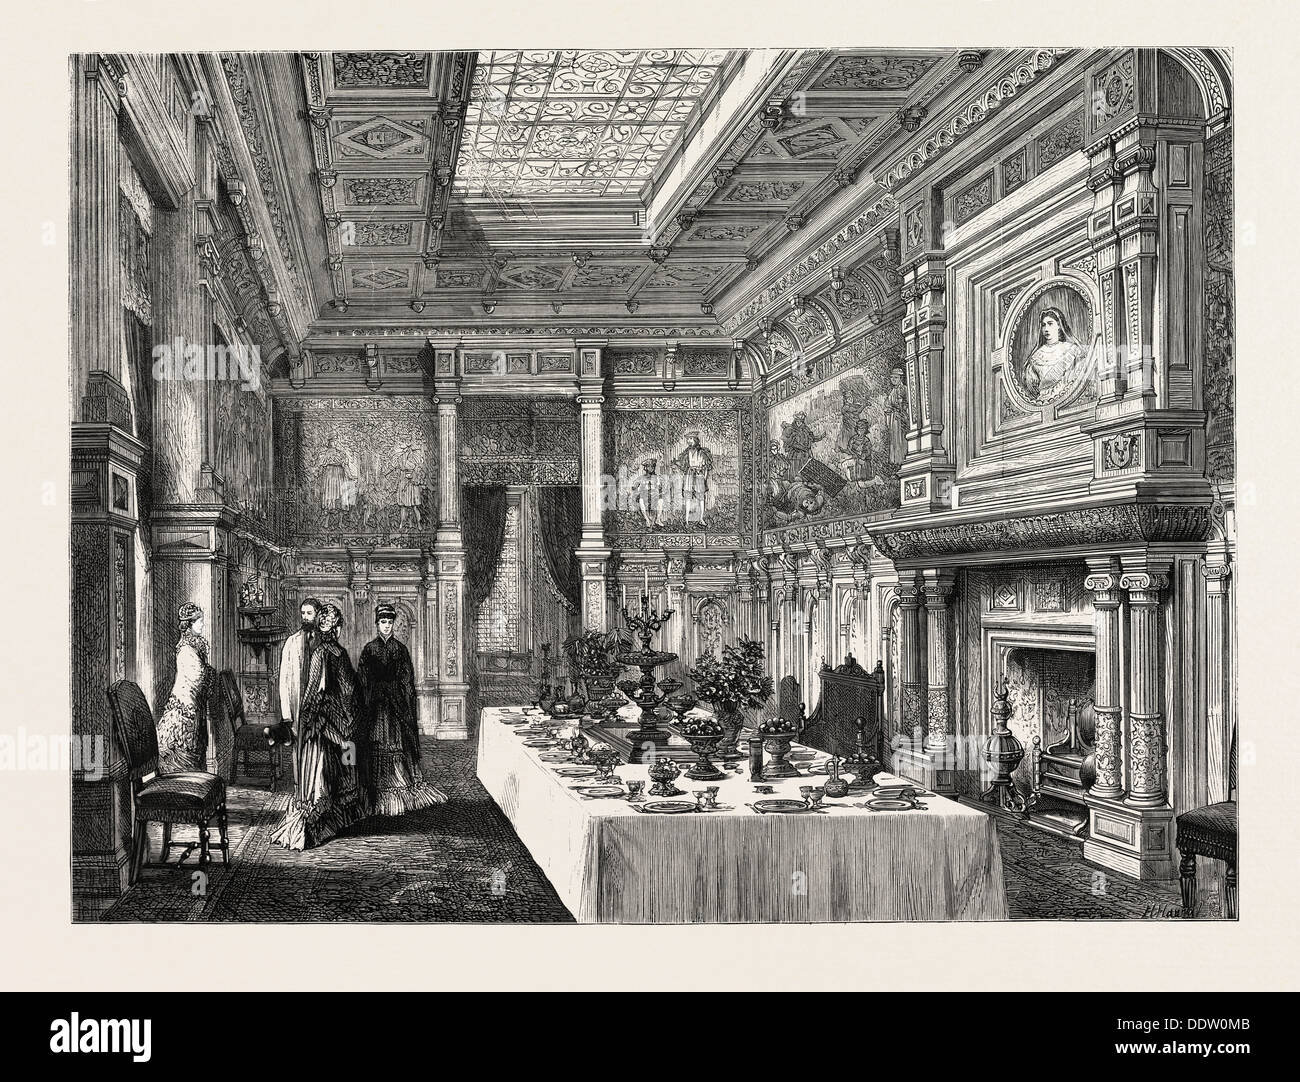 THE PARIS EXHITITION - THE DINING ROOM IN THE PRINCE OF WALES'S PAVILION, FRANCE Stock Photo